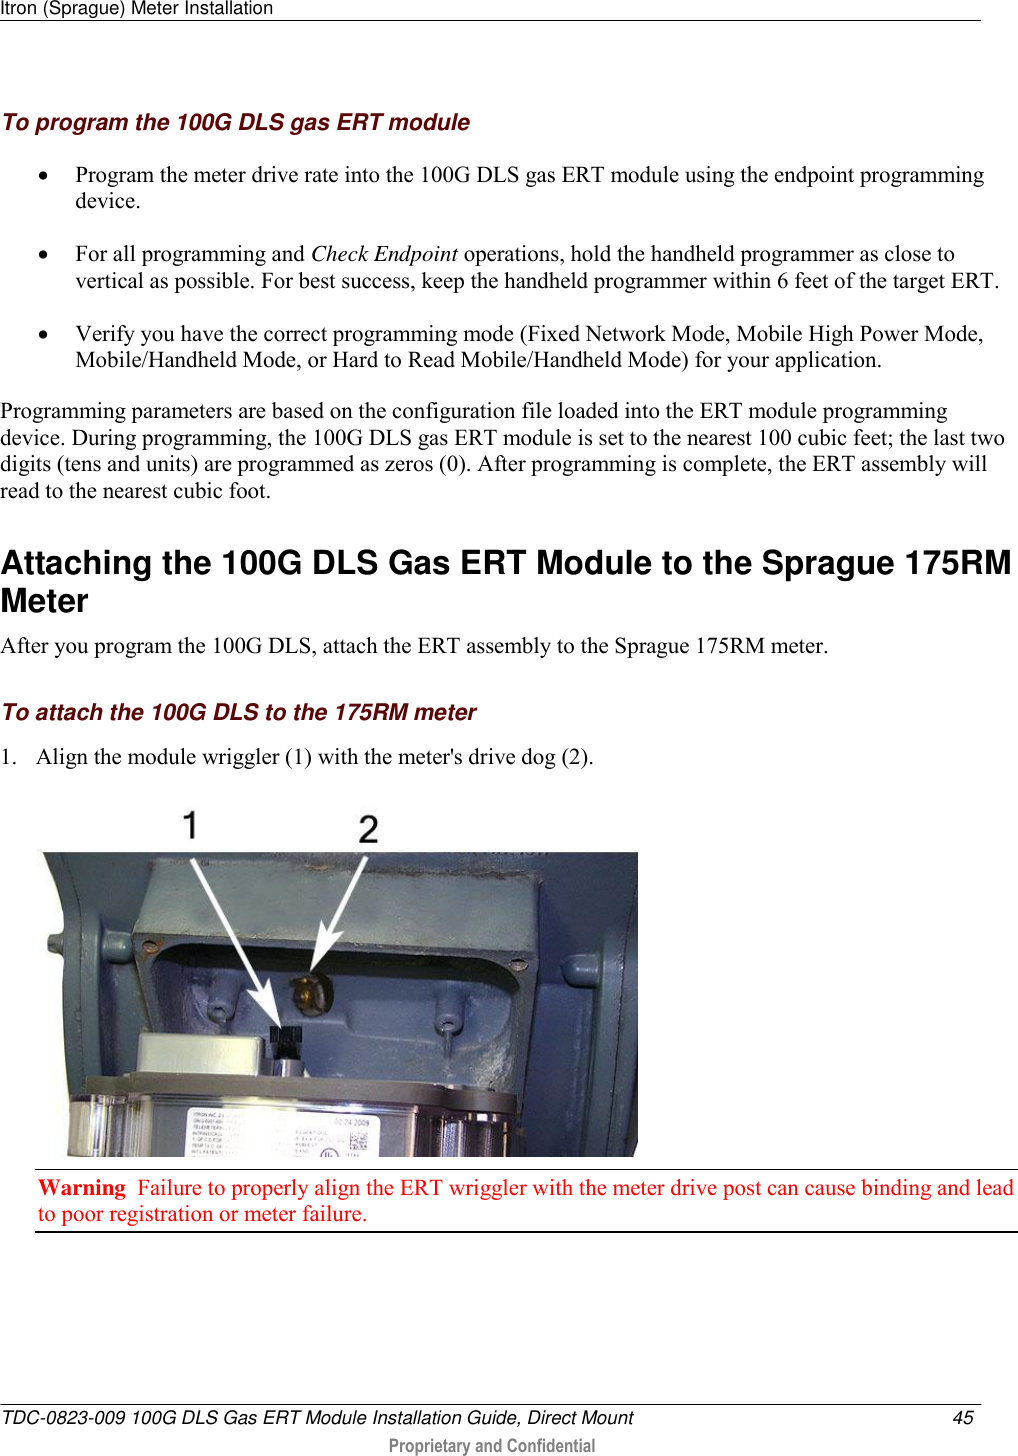 Itron (Sprague) Meter Installation   TDC-0823-009 100G DLS Gas ERT Module Installation Guide, Direct Mount  45   Proprietary and Confidential     To program the 100G DLS gas ERT module  Program the meter drive rate into the 100G DLS gas ERT module using the endpoint programming device.   For all programming and Check Endpoint operations, hold the handheld programmer as close to vertical as possible. For best success, keep the handheld programmer within 6 feet of the target ERT.  Verify you have the correct programming mode (Fixed Network Mode, Mobile High Power Mode, Mobile/Handheld Mode, or Hard to Read Mobile/Handheld Mode) for your application.  Programming parameters are based on the configuration file loaded into the ERT module programming device. During programming, the 100G DLS gas ERT module is set to the nearest 100 cubic feet; the last two digits (tens and units) are programmed as zeros (0). After programming is complete, the ERT assembly will read to the nearest cubic foot.   Attaching the 100G DLS Gas ERT Module to the Sprague 175RM Meter After you program the 100G DLS, attach the ERT assembly to the Sprague 175RM meter.  To attach the 100G DLS to the 175RM meter 1. Align the module wriggler (1) with the meter&apos;s drive dog (2).  Warning  Failure to properly align the ERT wriggler with the meter drive post can cause binding and lead to poor registration or meter failure.  